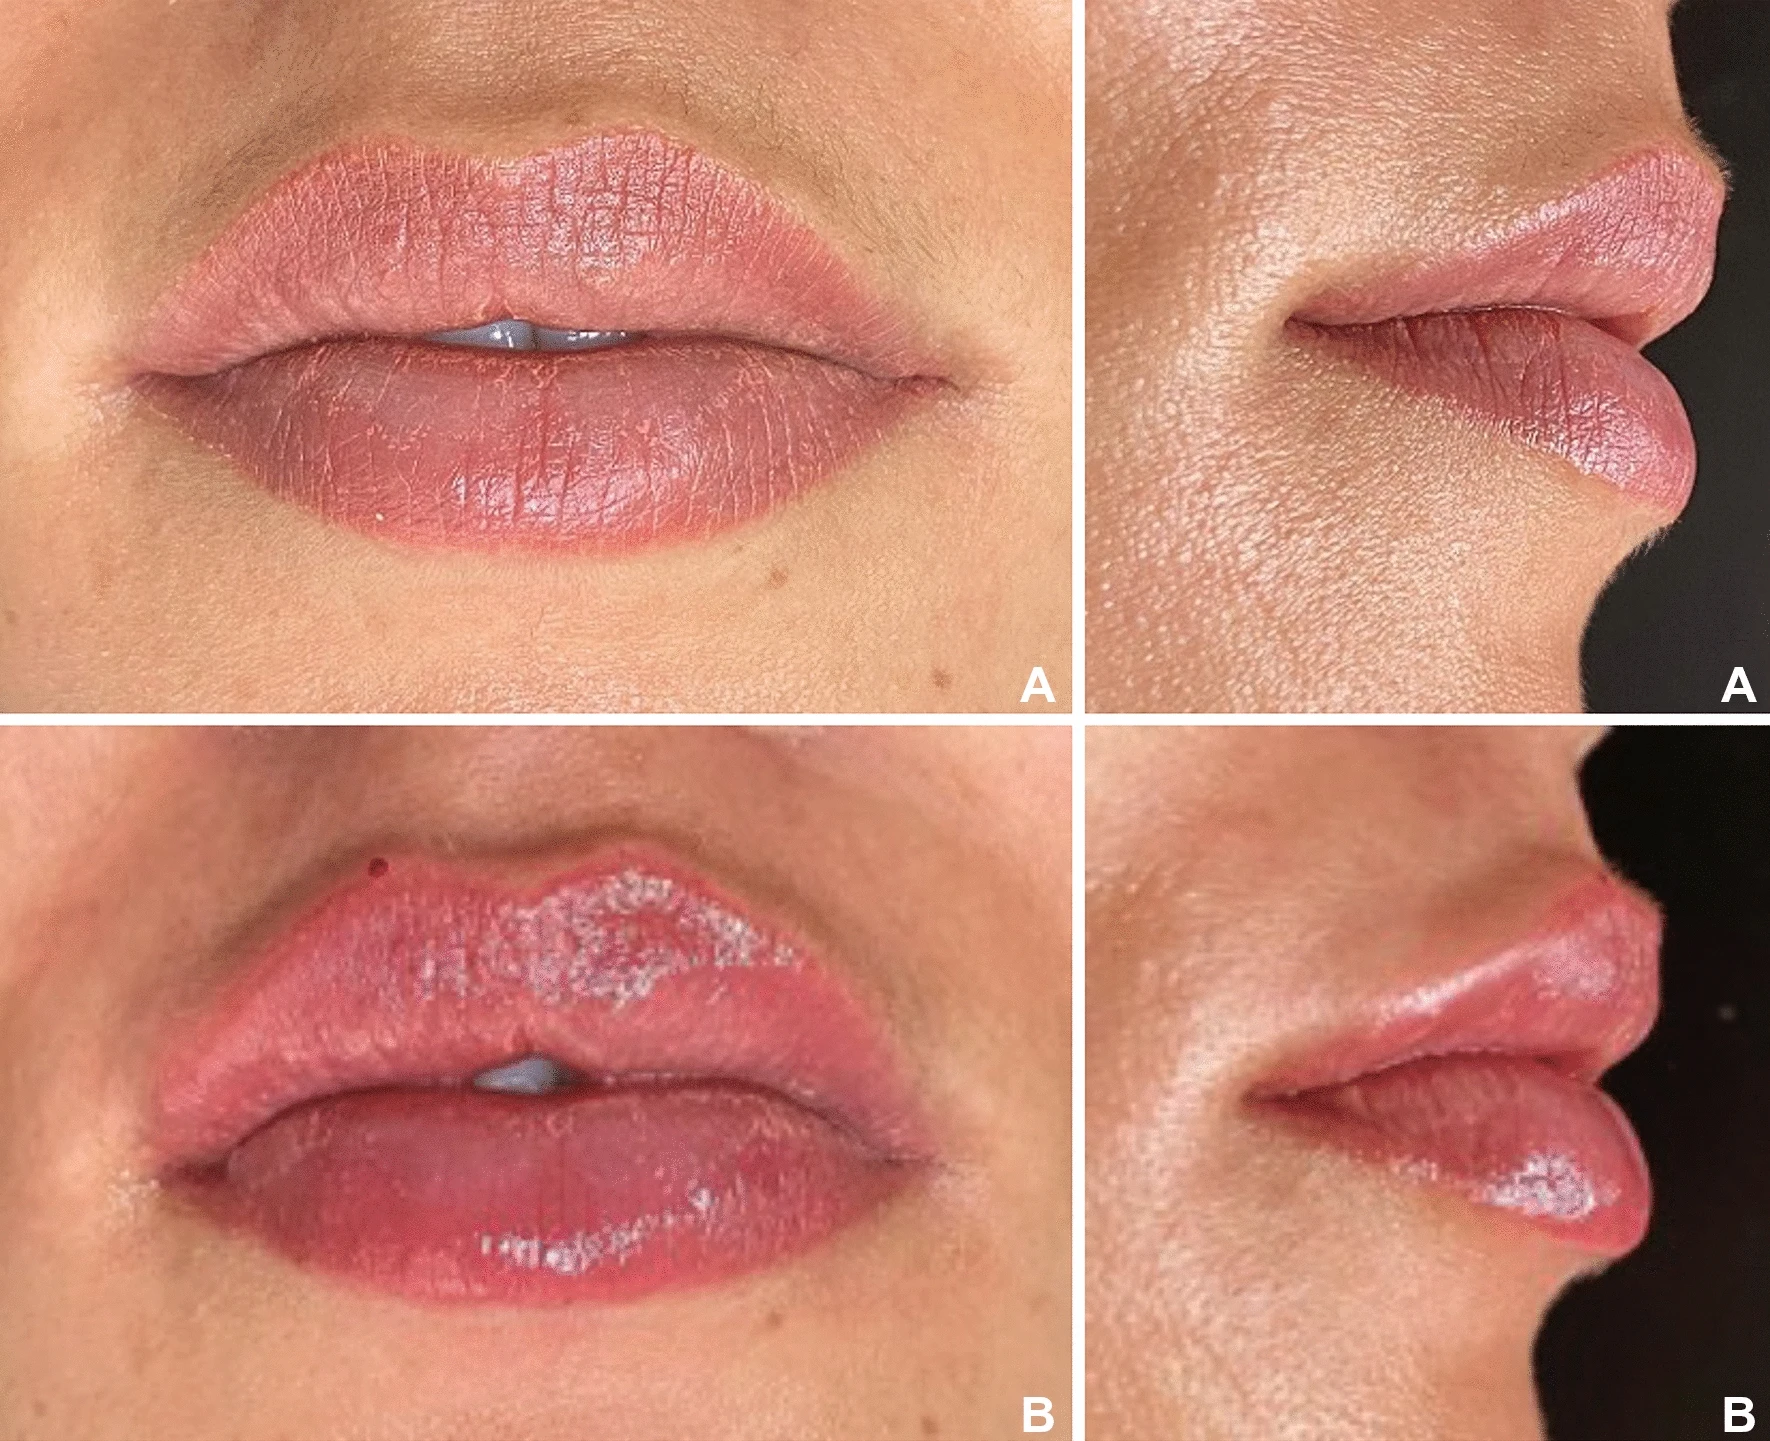 Patient from the group with thicker lips (a) before lip filling and (b) ten days after lip filling. (Image: De Queiroz Hernandez et al., licensed under CC BY 4.0)